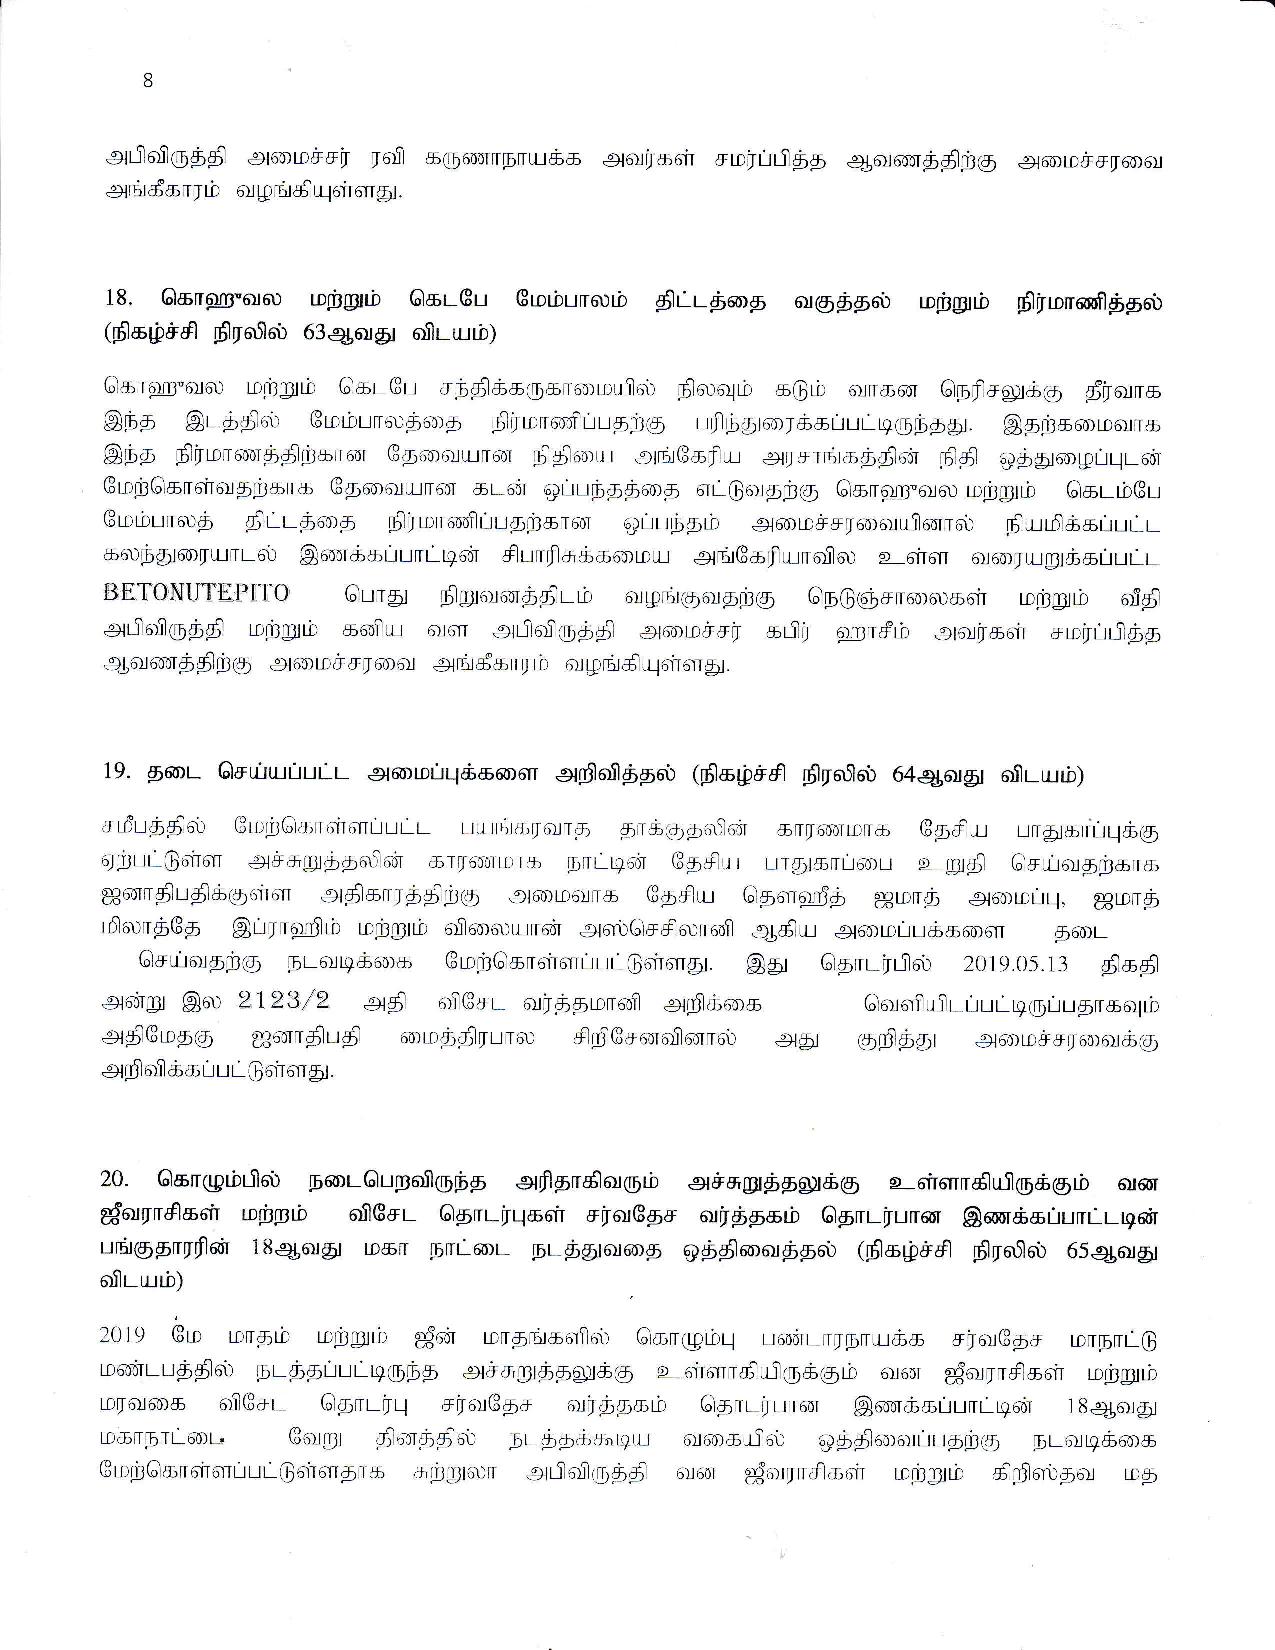 Cabinet Decision on 21.05.2019 Tamil page 009